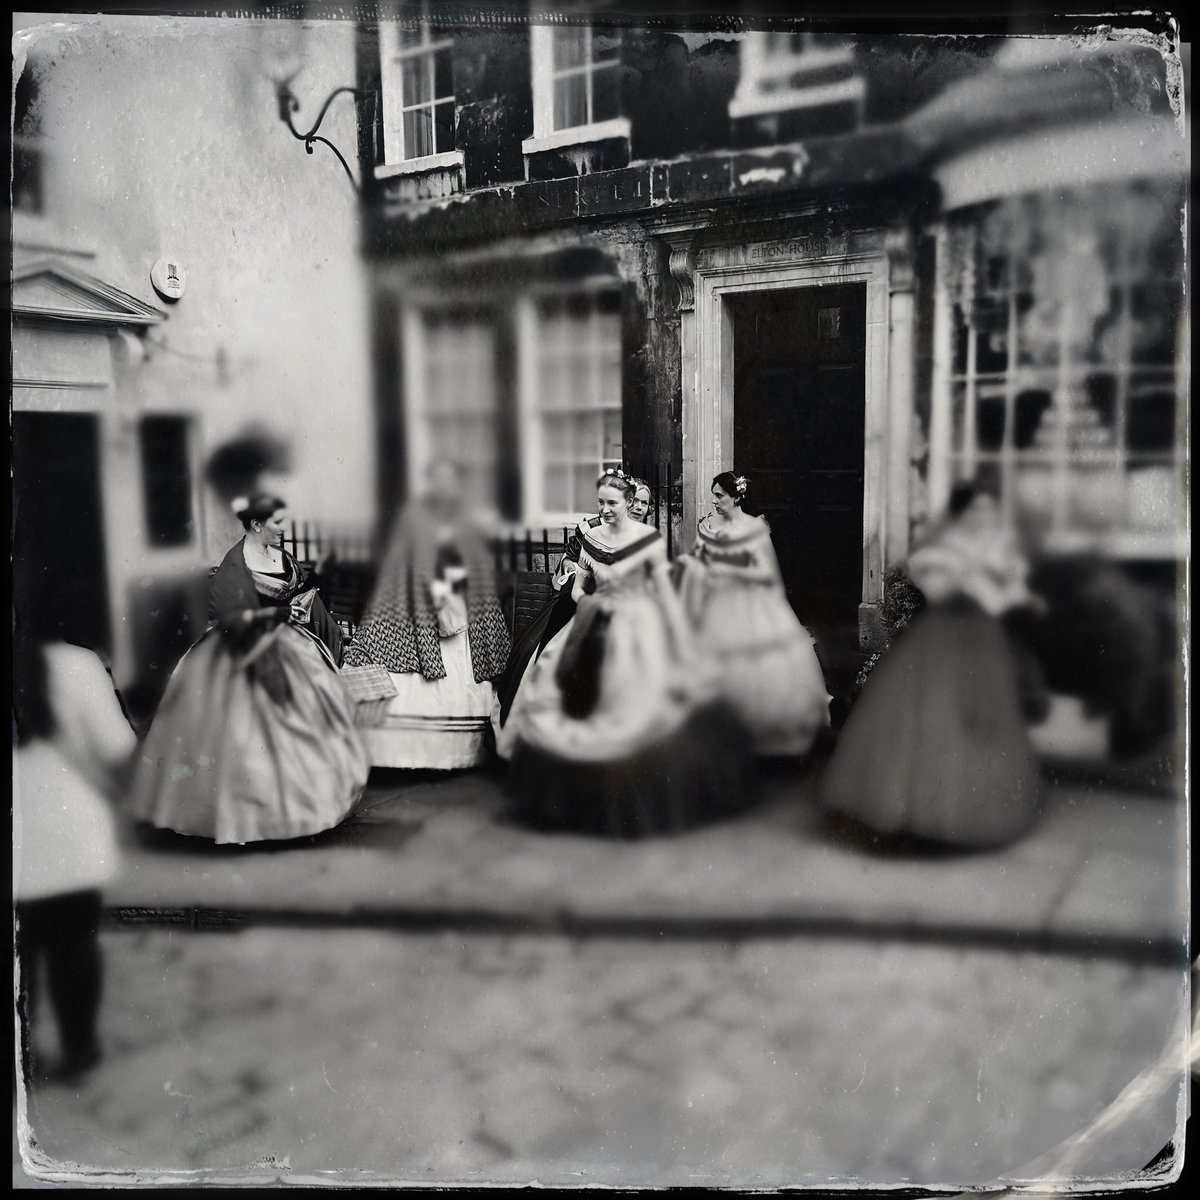 Day out in Bath going from bar to bar,hopefully it’s Austin day soon or I’ve drunk way too much. #tintype #hipsatmaticx #Bath #janeaustin